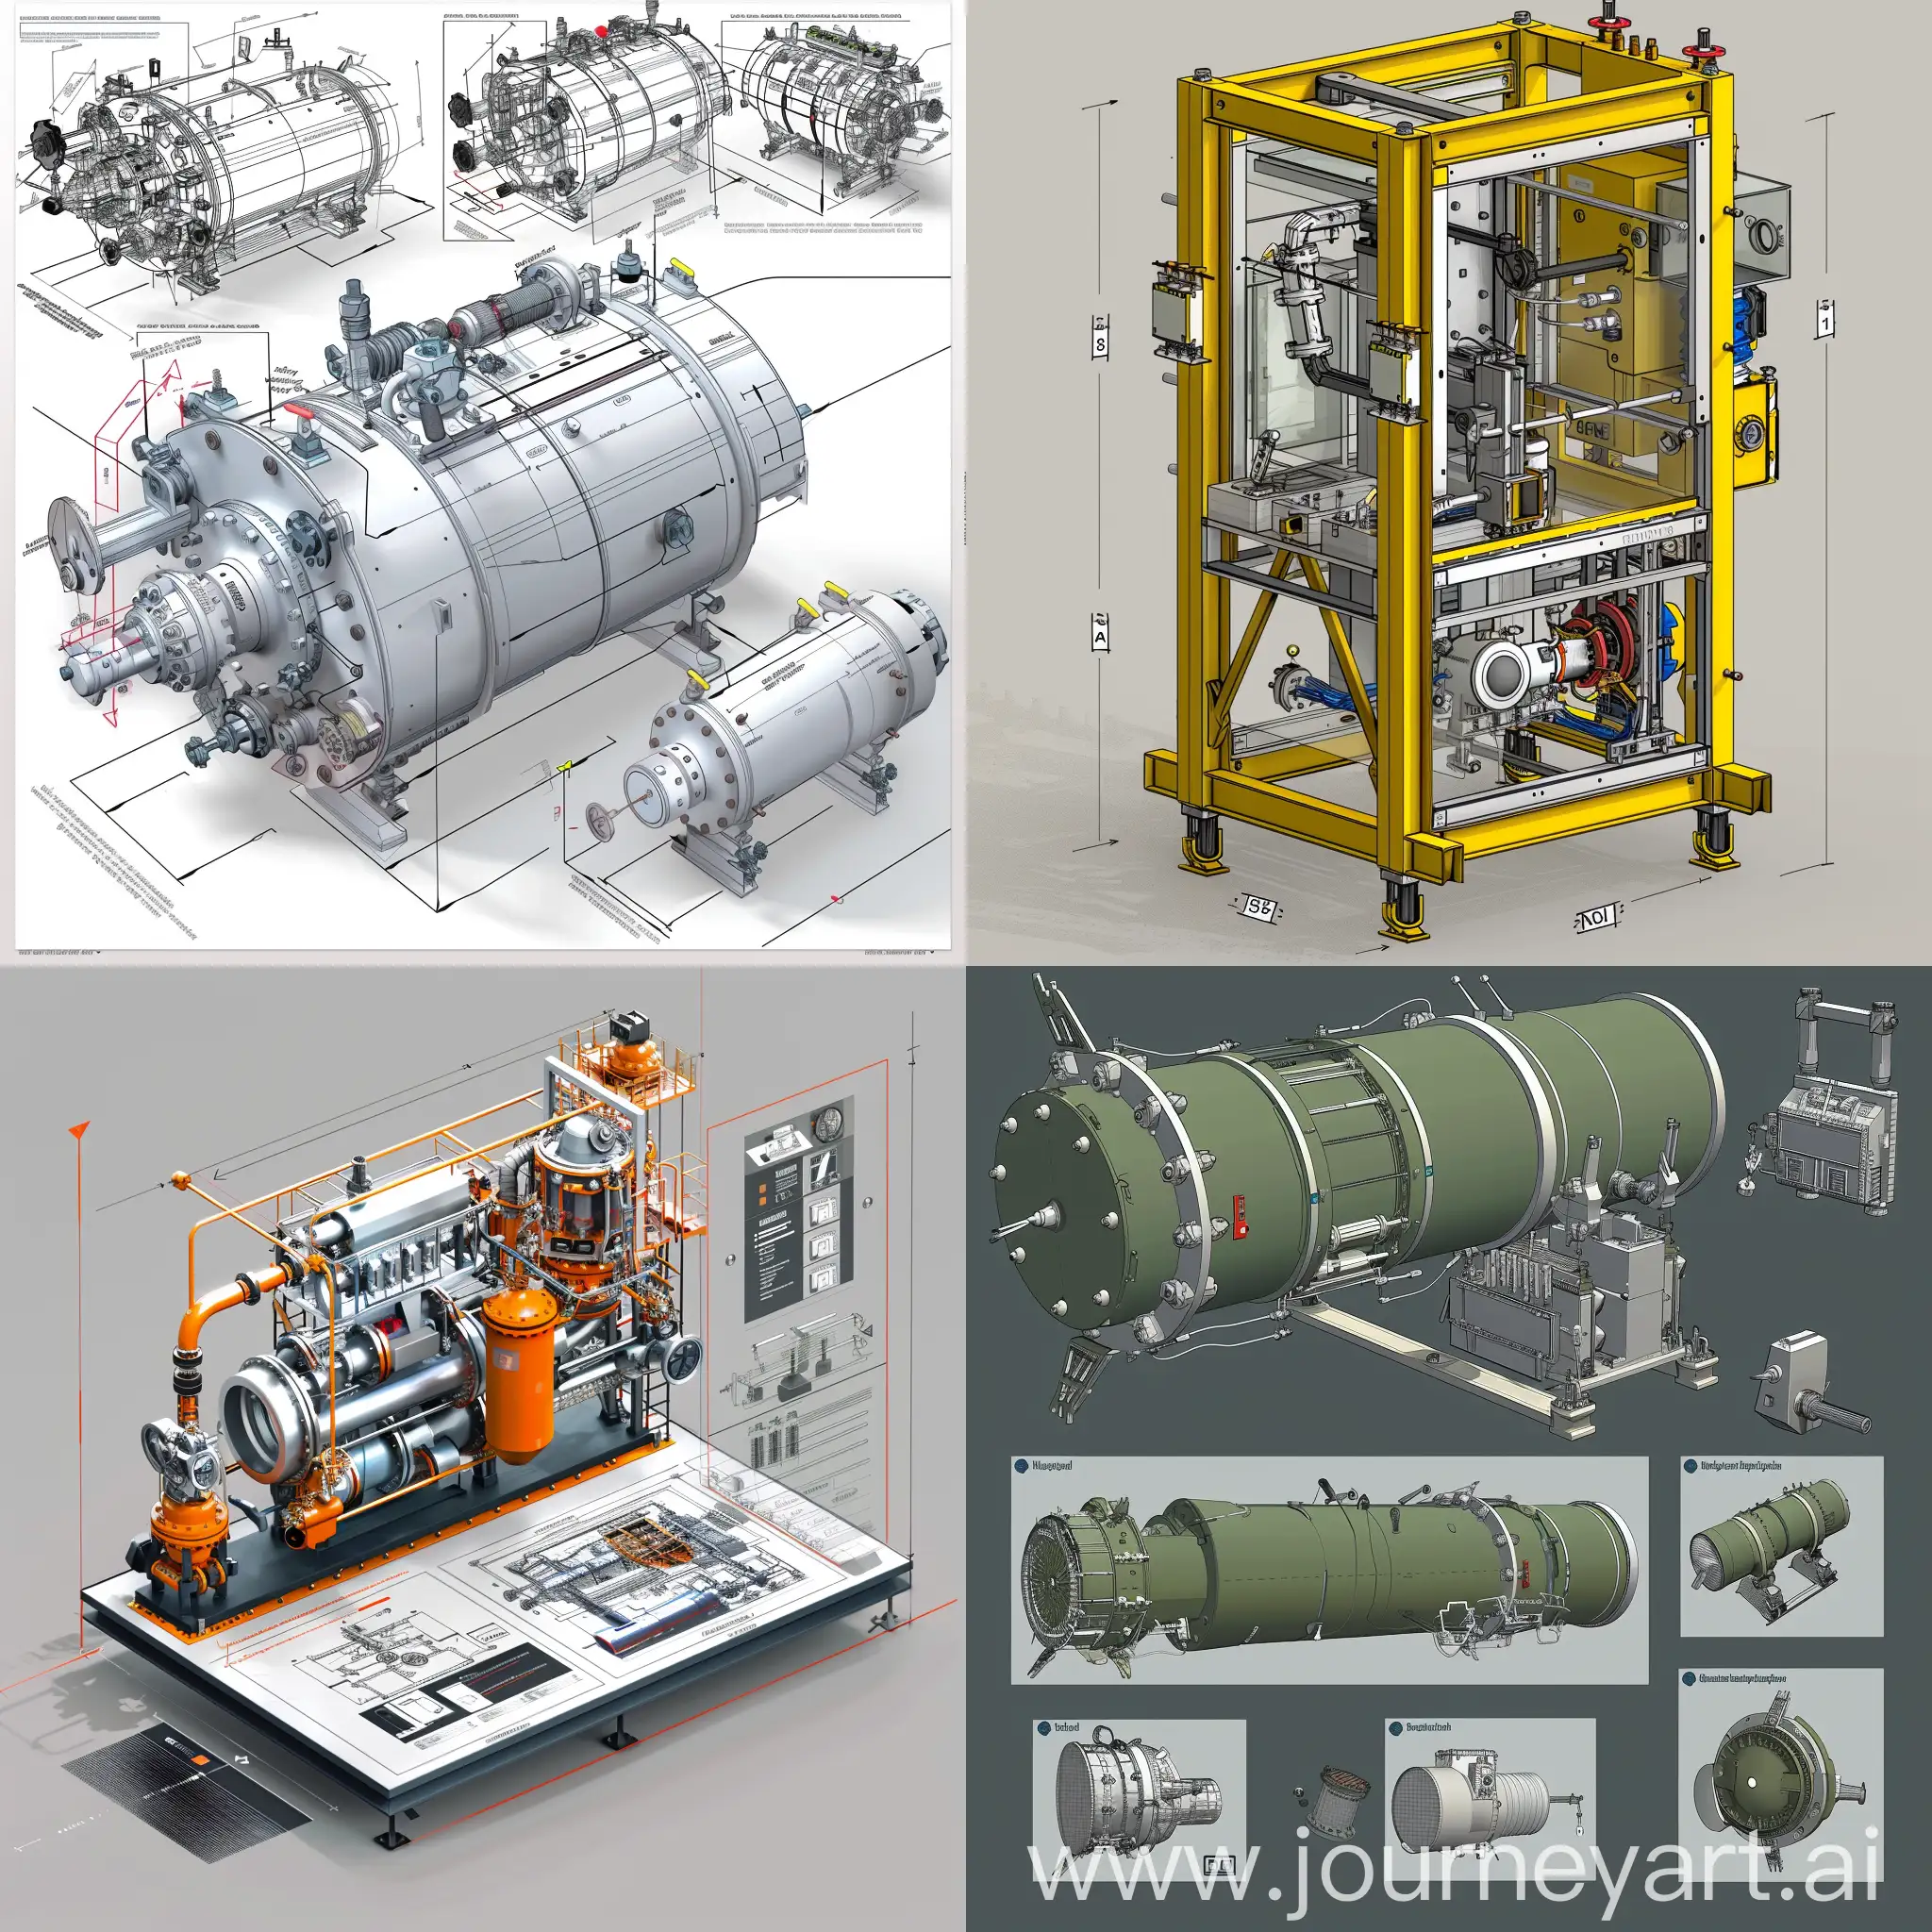 The website for the company specializes in the production of explosion-proof equipment designed to work in conditions of increased explosion hazard. Develop a design for an additional page using CAD (computer-aided design system). The user must enter parameters, and the result must be displayed as images of the designed equipment.